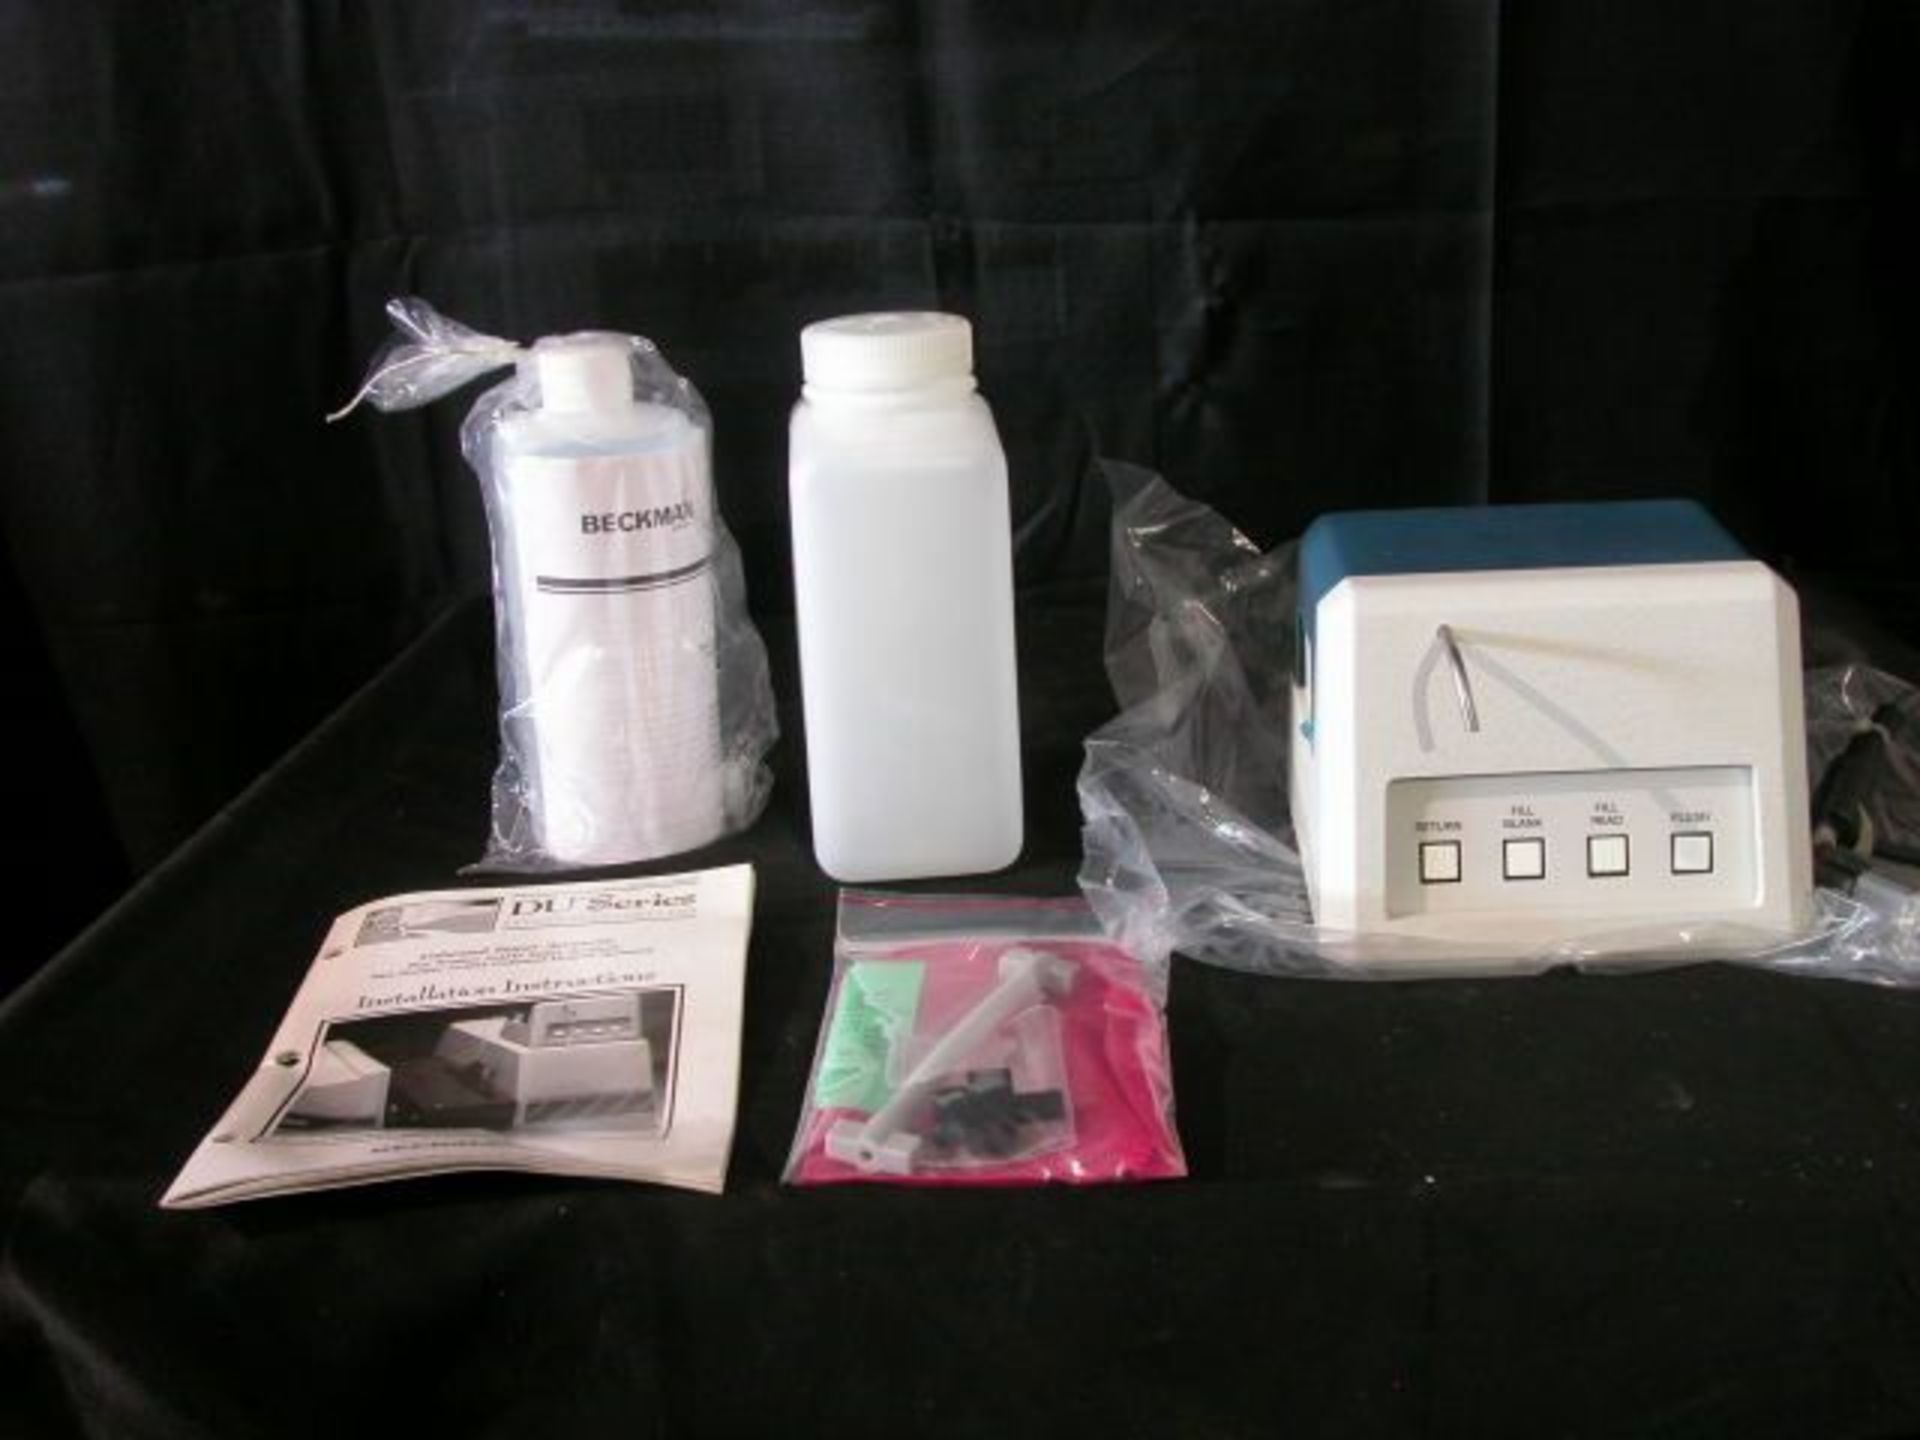 Beckman 514242 HM Sipper Unheated For DU Spectrophotometer 600, 70, 7000, 800, Qty 1, 331887650551 - Image 5 of 6